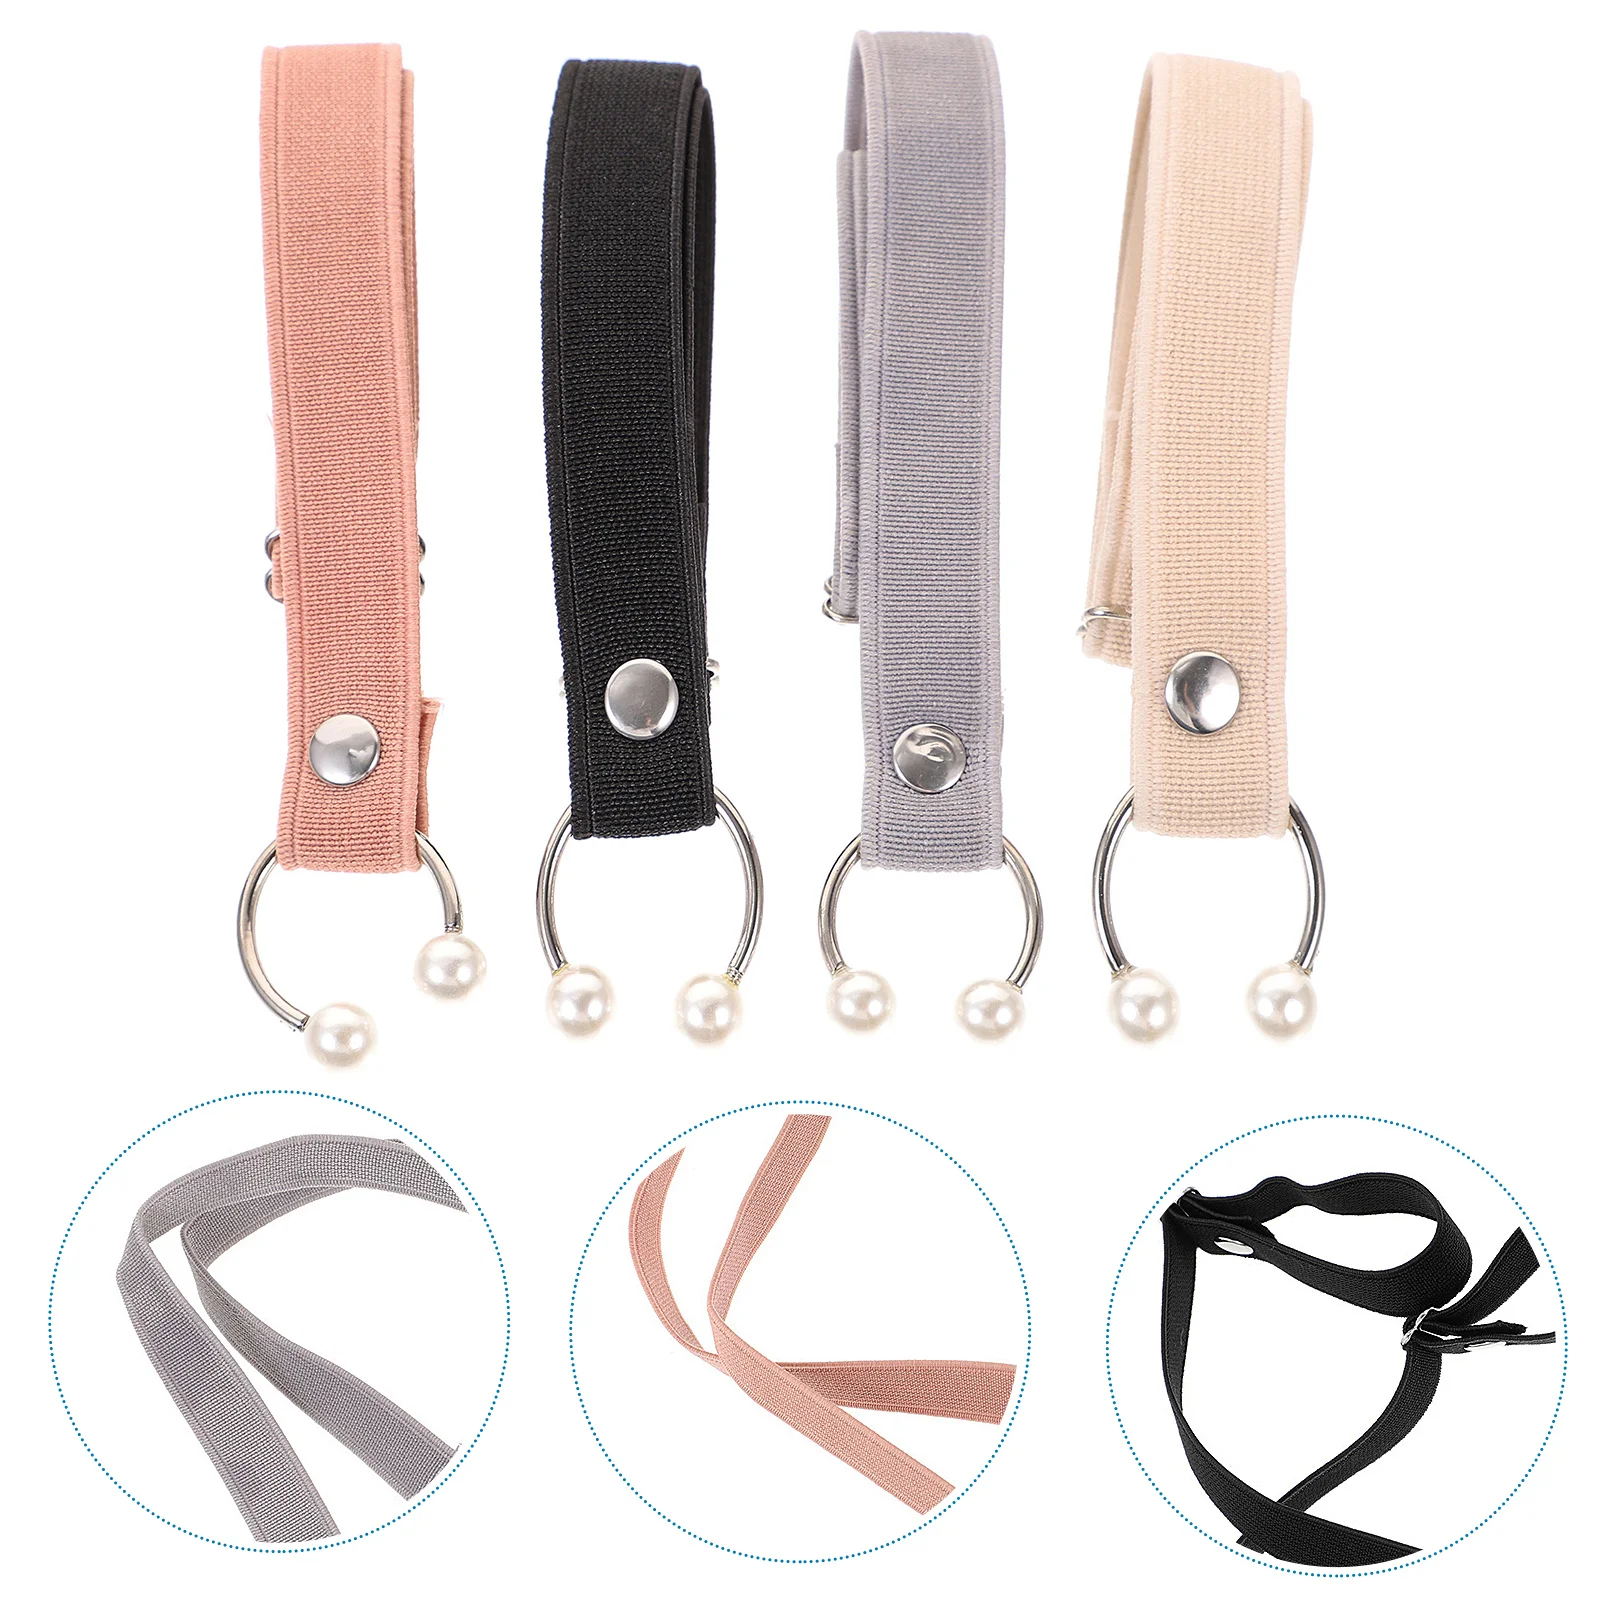 

High Heels Anti Drop Holding Accessories Detachable Shoe Straps for Anti-loose Shoelaces Women Strappy Sandals Women's Heeled